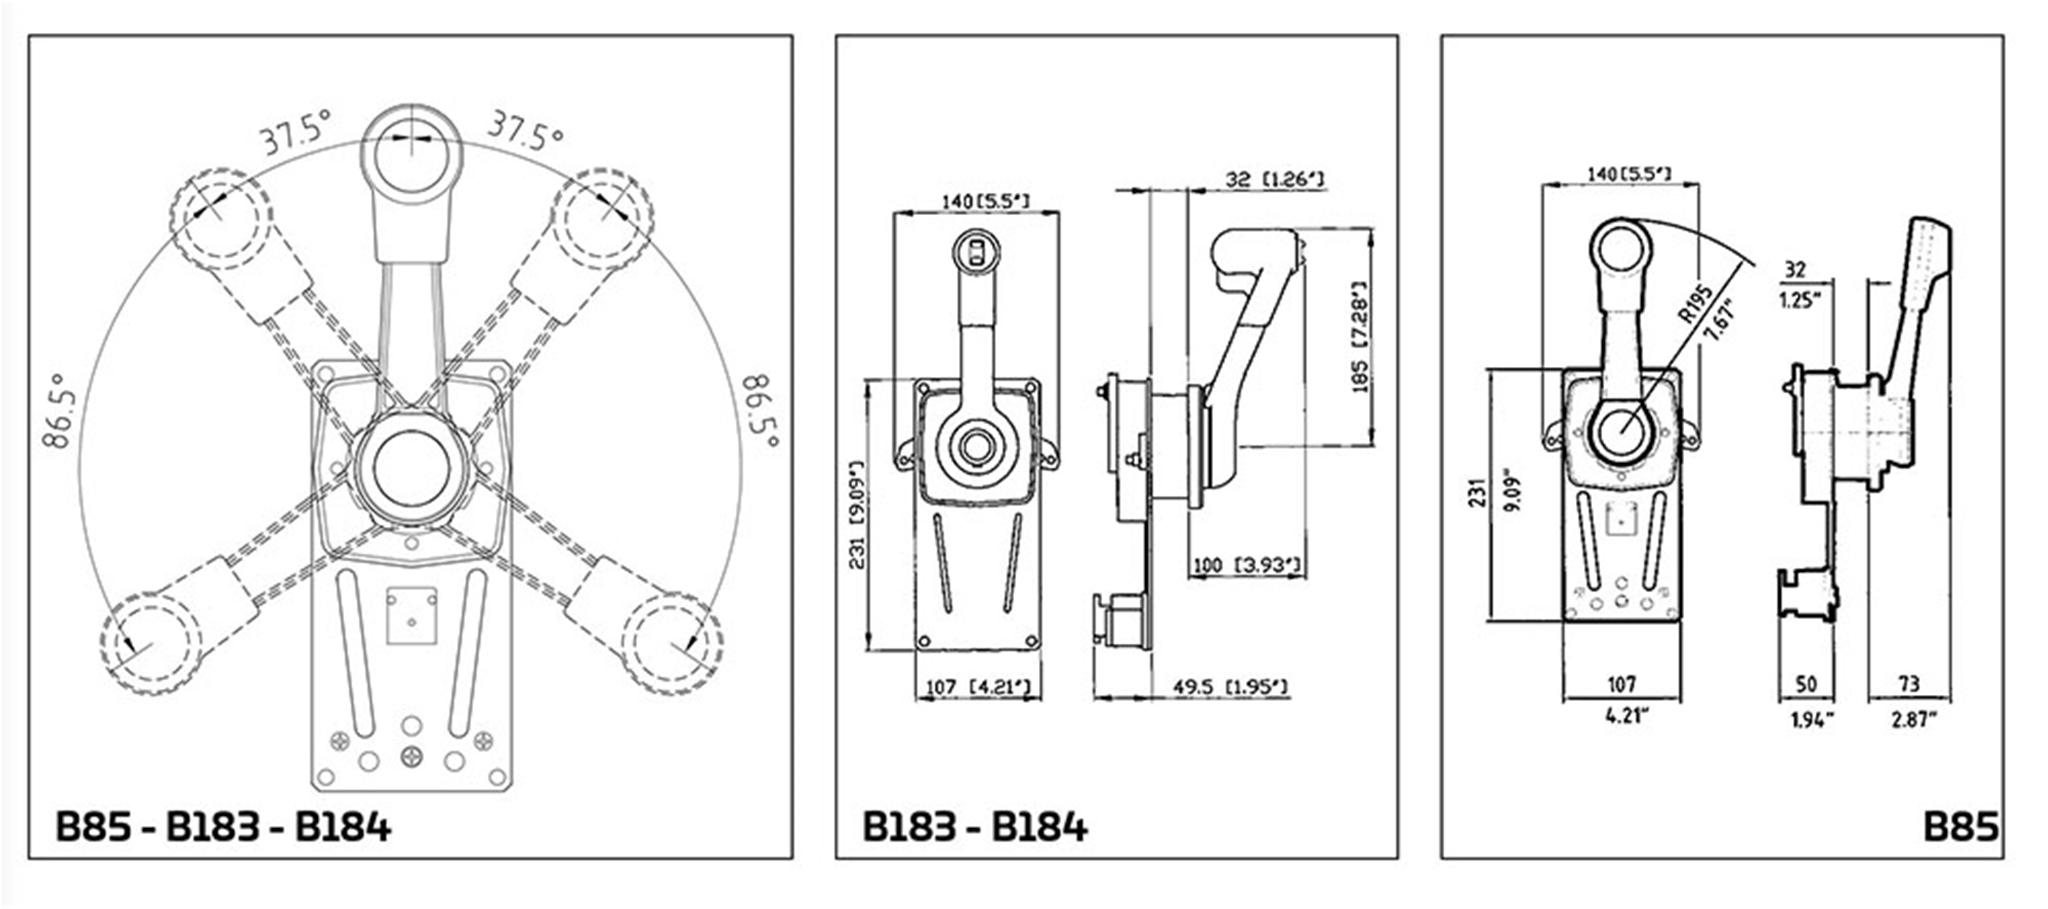 B184 Controller Specification